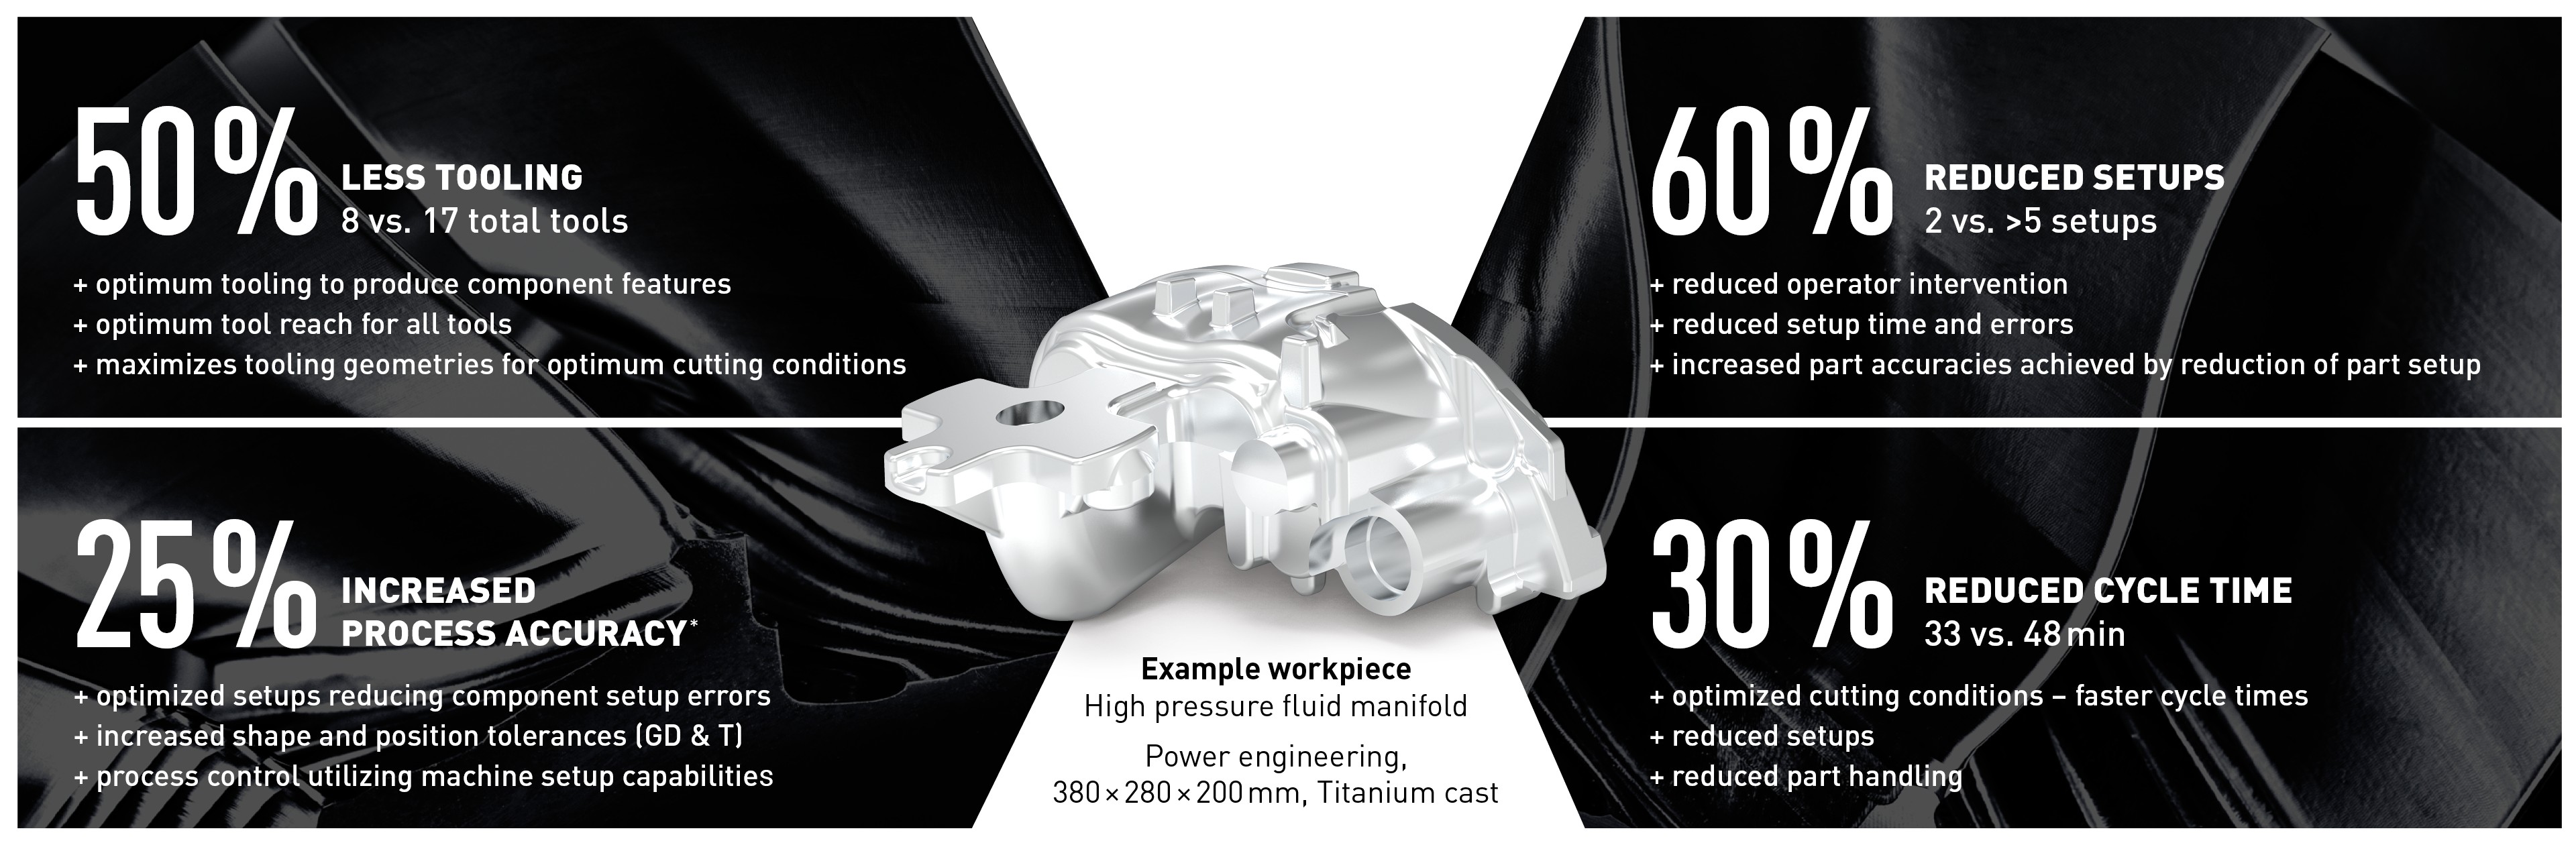 Advantages of 5-axis machining